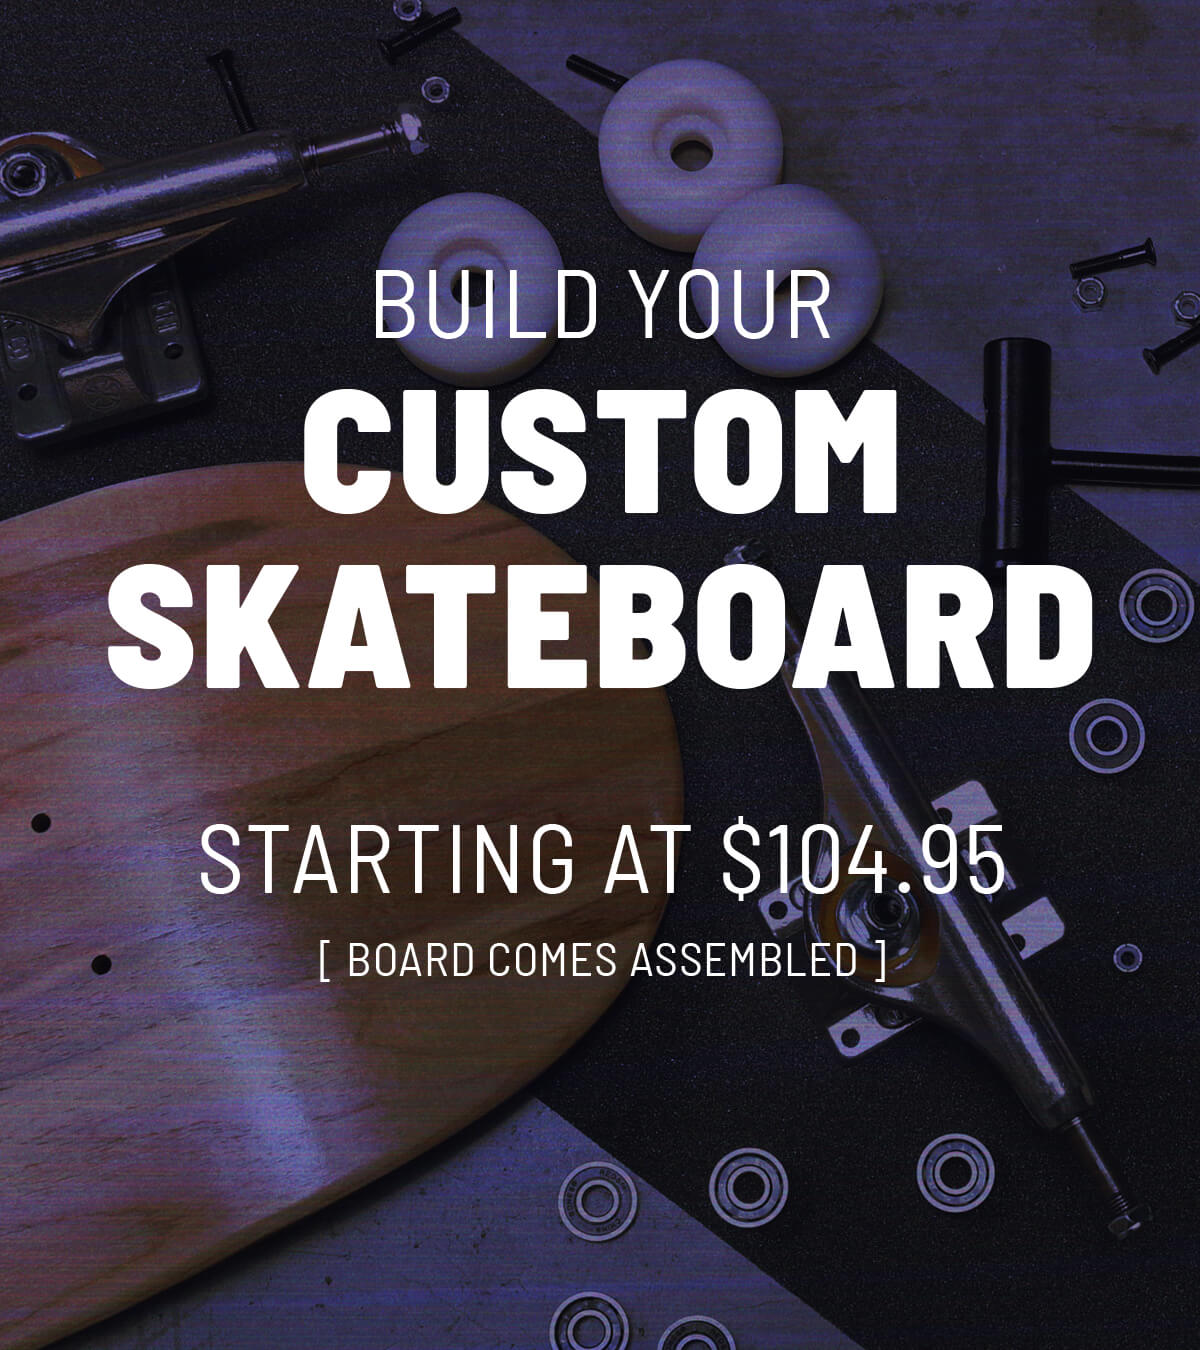 CUSTOMER SKATE PACKAGES STARTING AT $104.95 - SHOP NOW